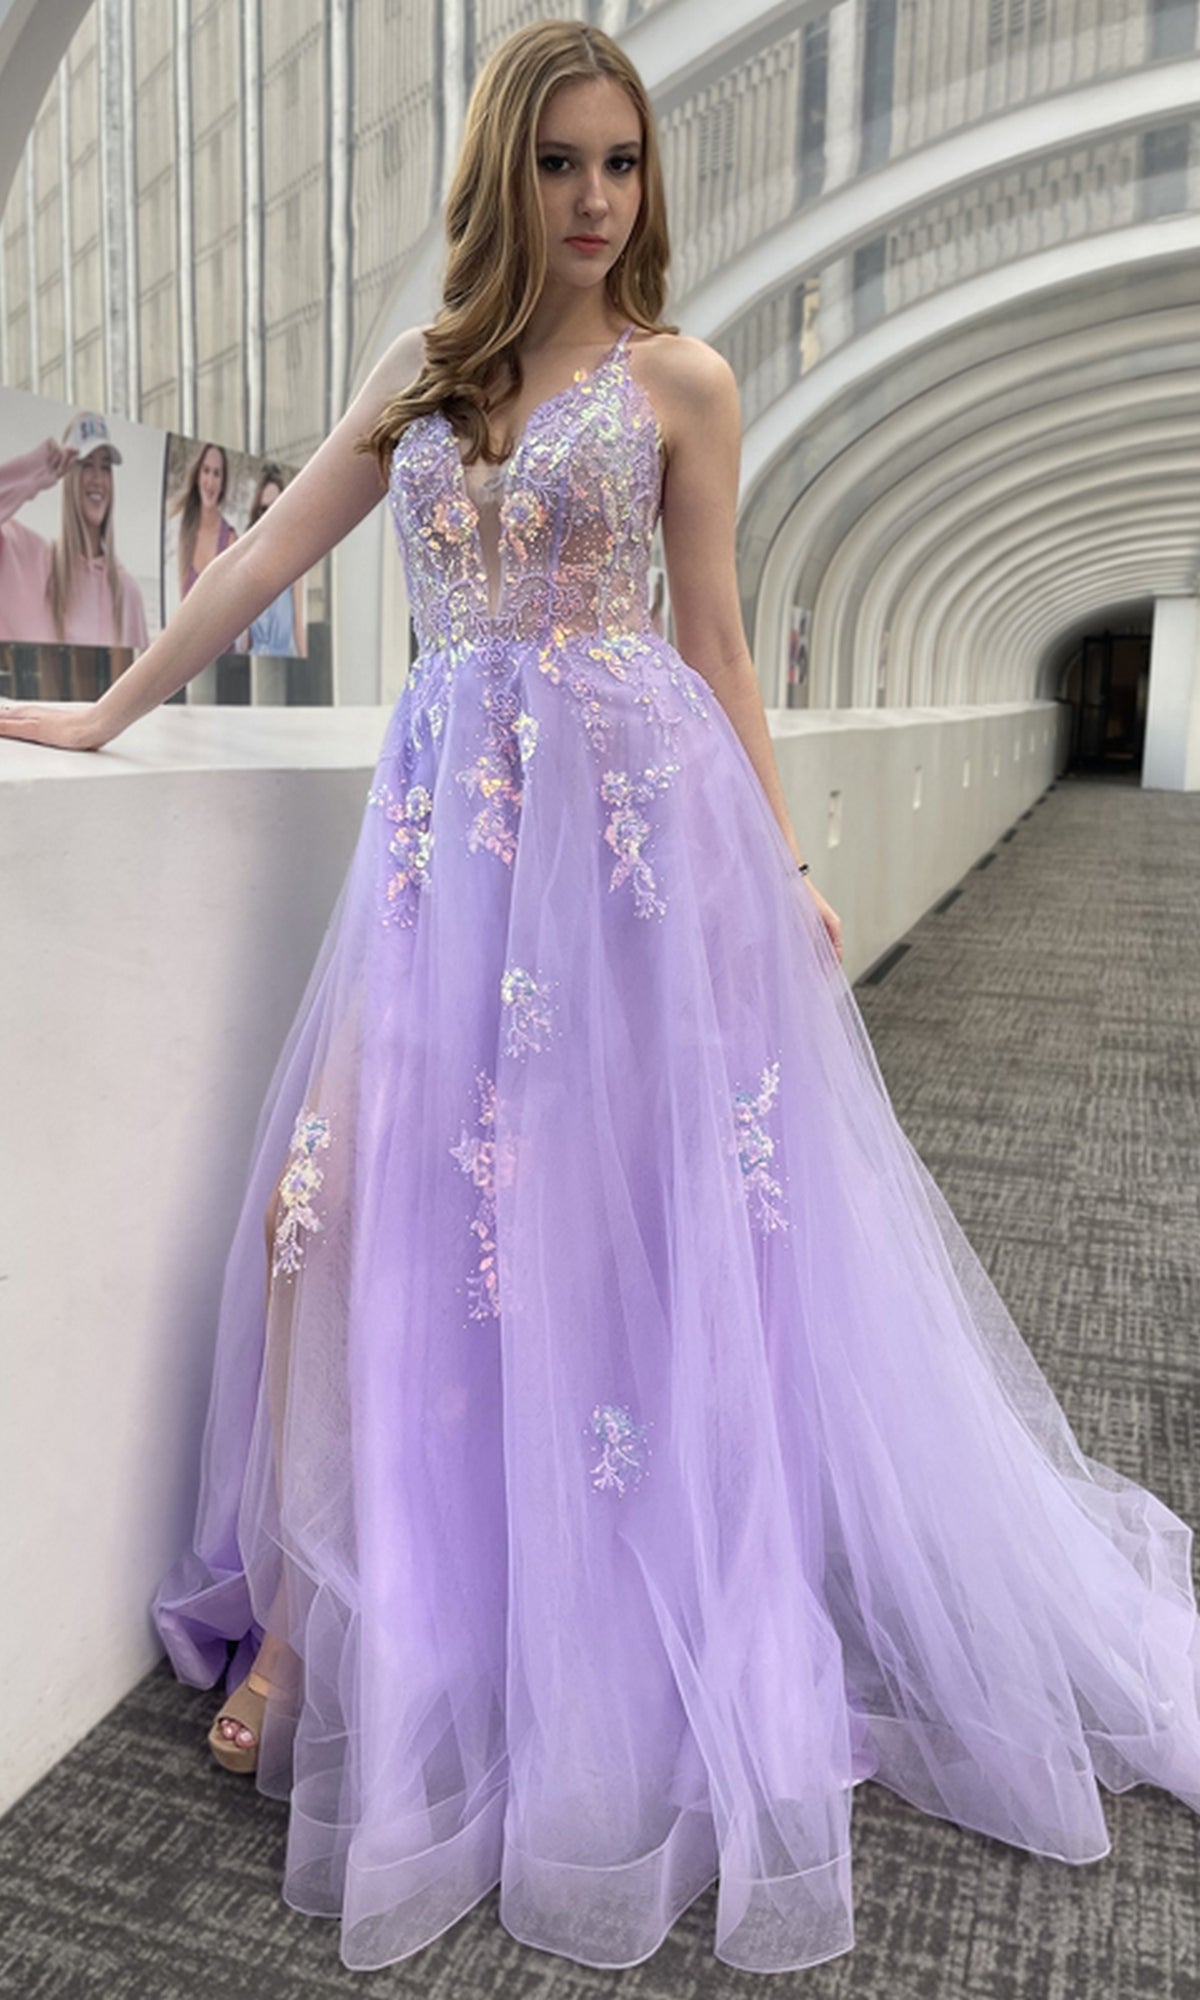 Long Pastel Prom Ball Gown with Flowers - PromGirl